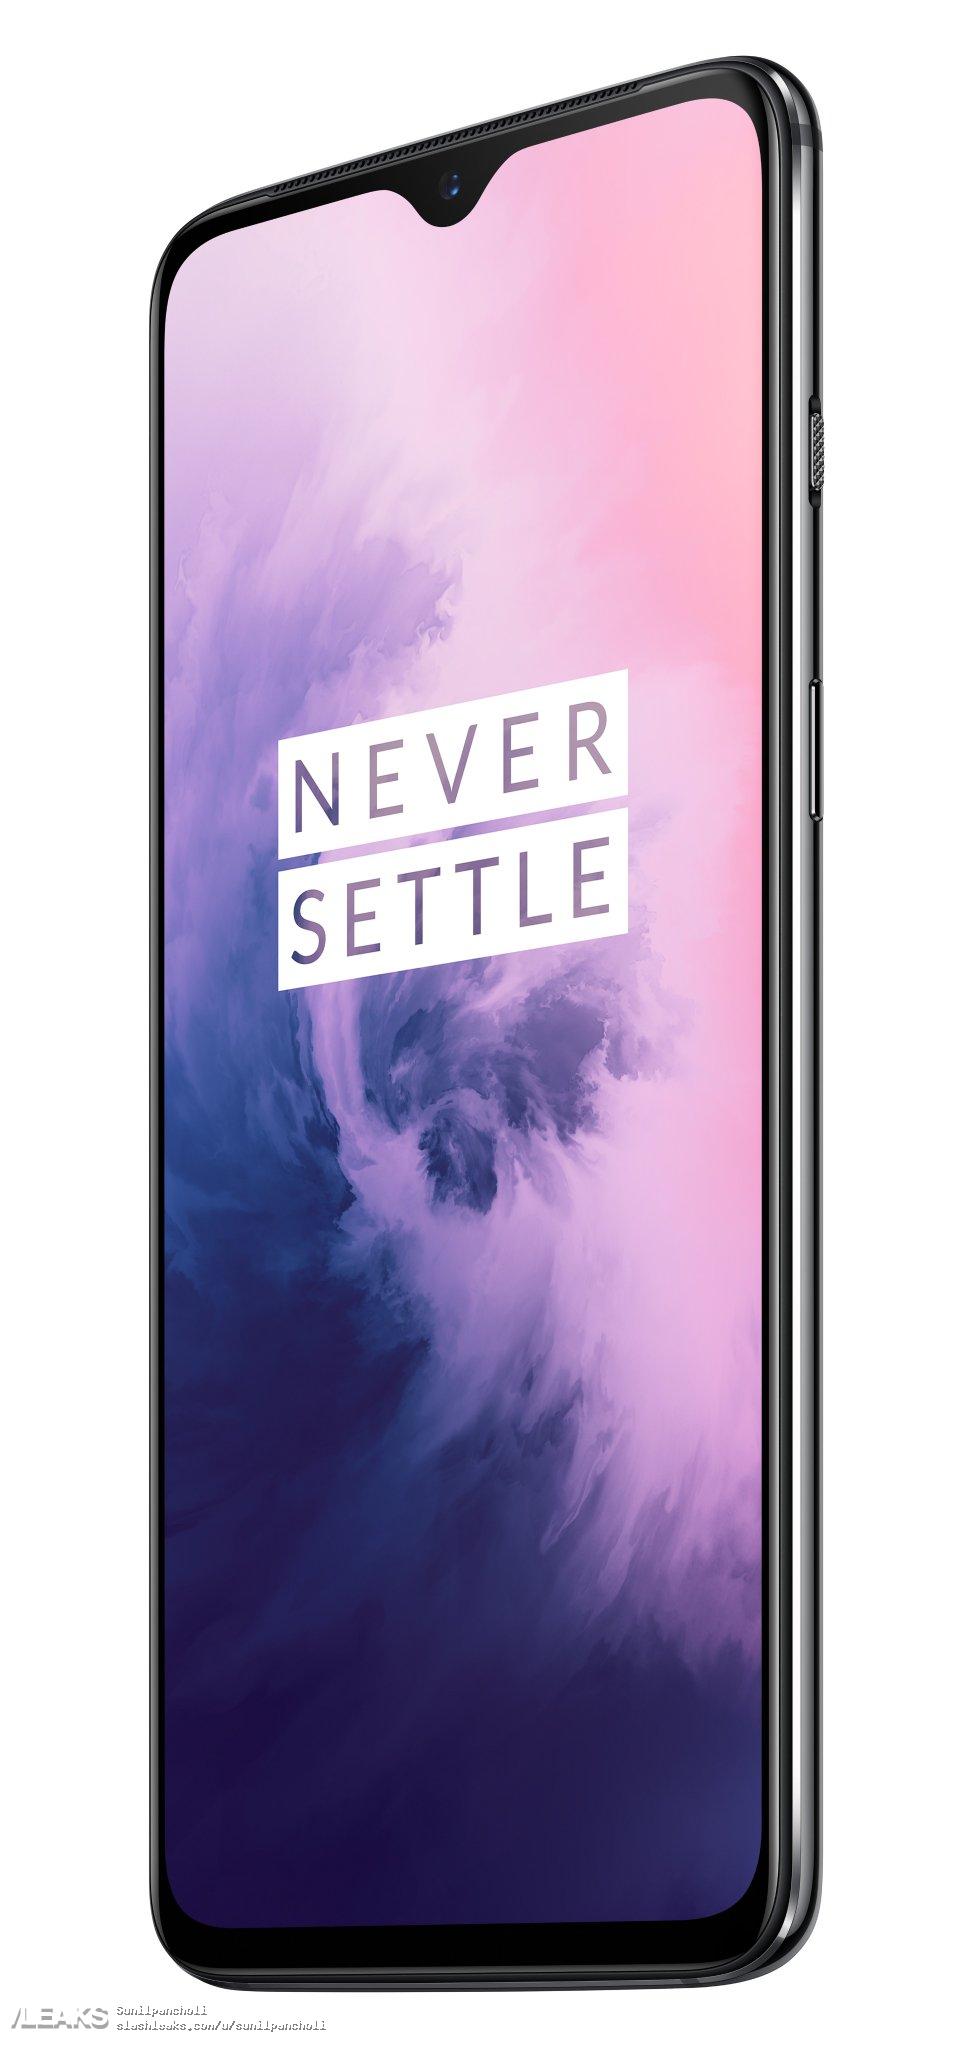 oneplus 7 standard version with all details no 3.5mm jack hope stereo sound 435